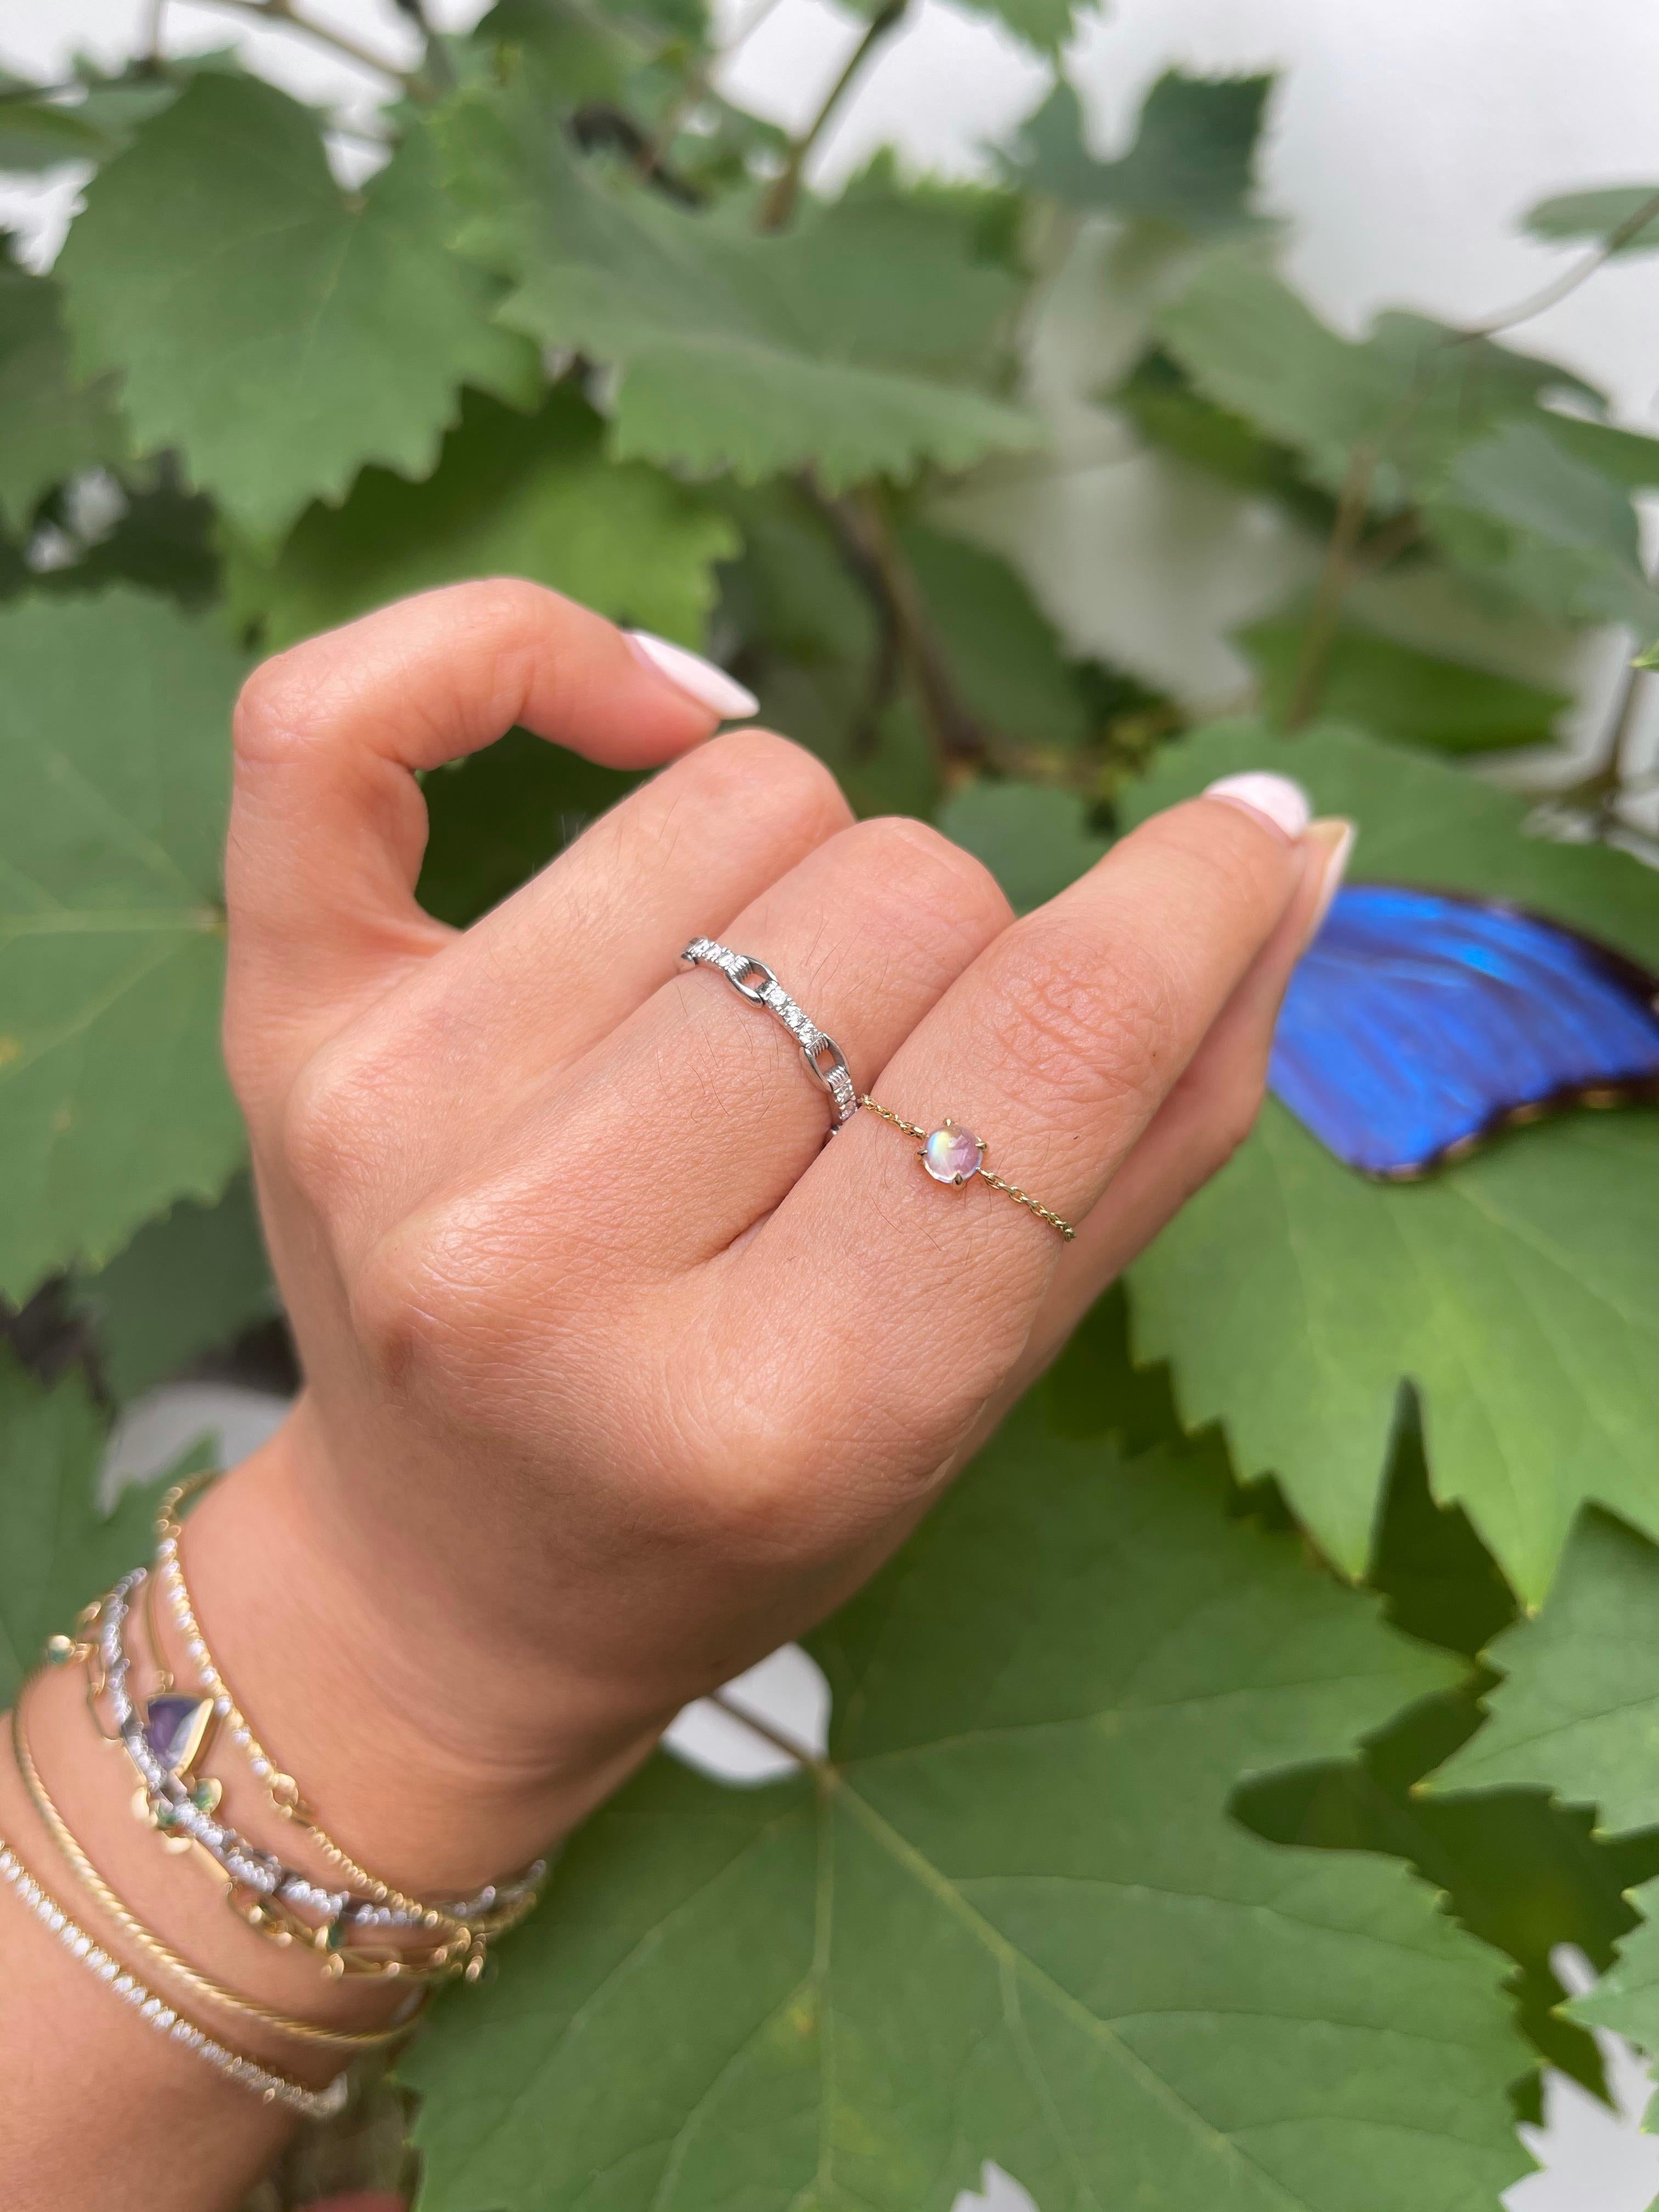 This is what dreams are made of. A perfectly formed gemstone with flashes of blue make this an extra rare gem. This is a magical gemstone which enhances intuition & awareness. 


Wear it along or stack it one of our chain rings from the Dot